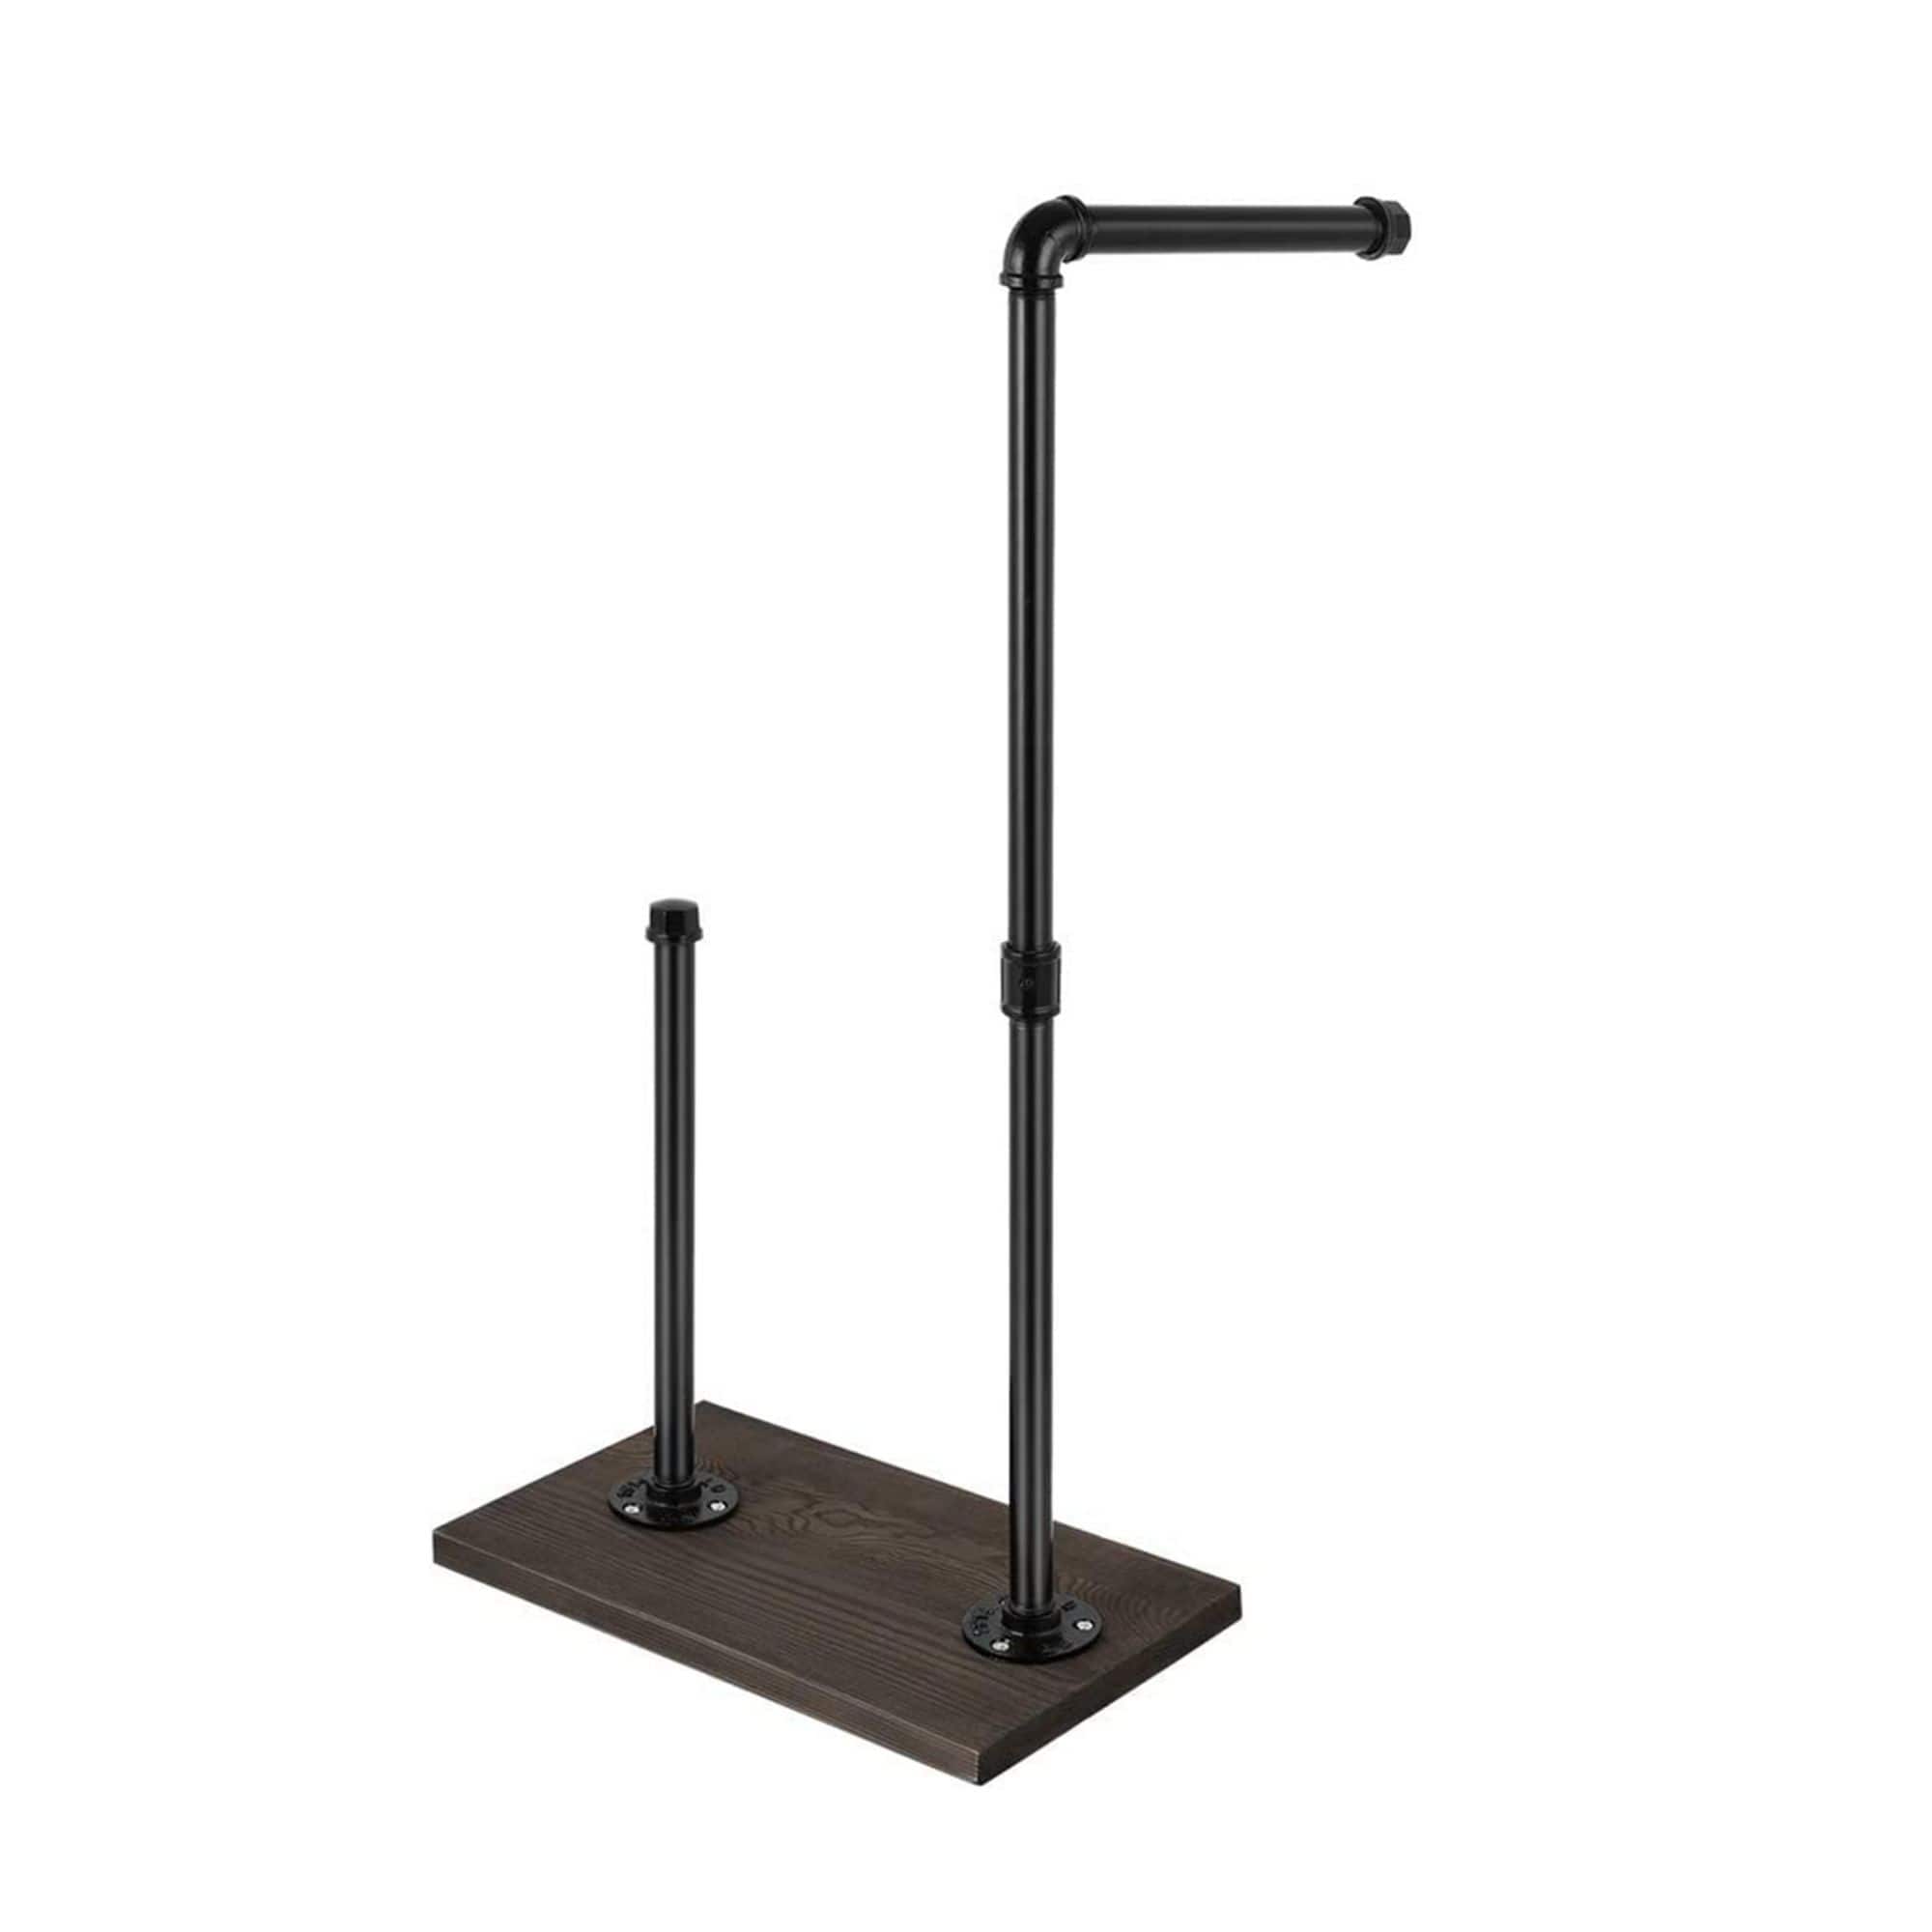 Black Freestanding Metal Toilet Paper Holder Stand by NEX | 6.8 x 22.9 x 6.8 | Michaels D722912S